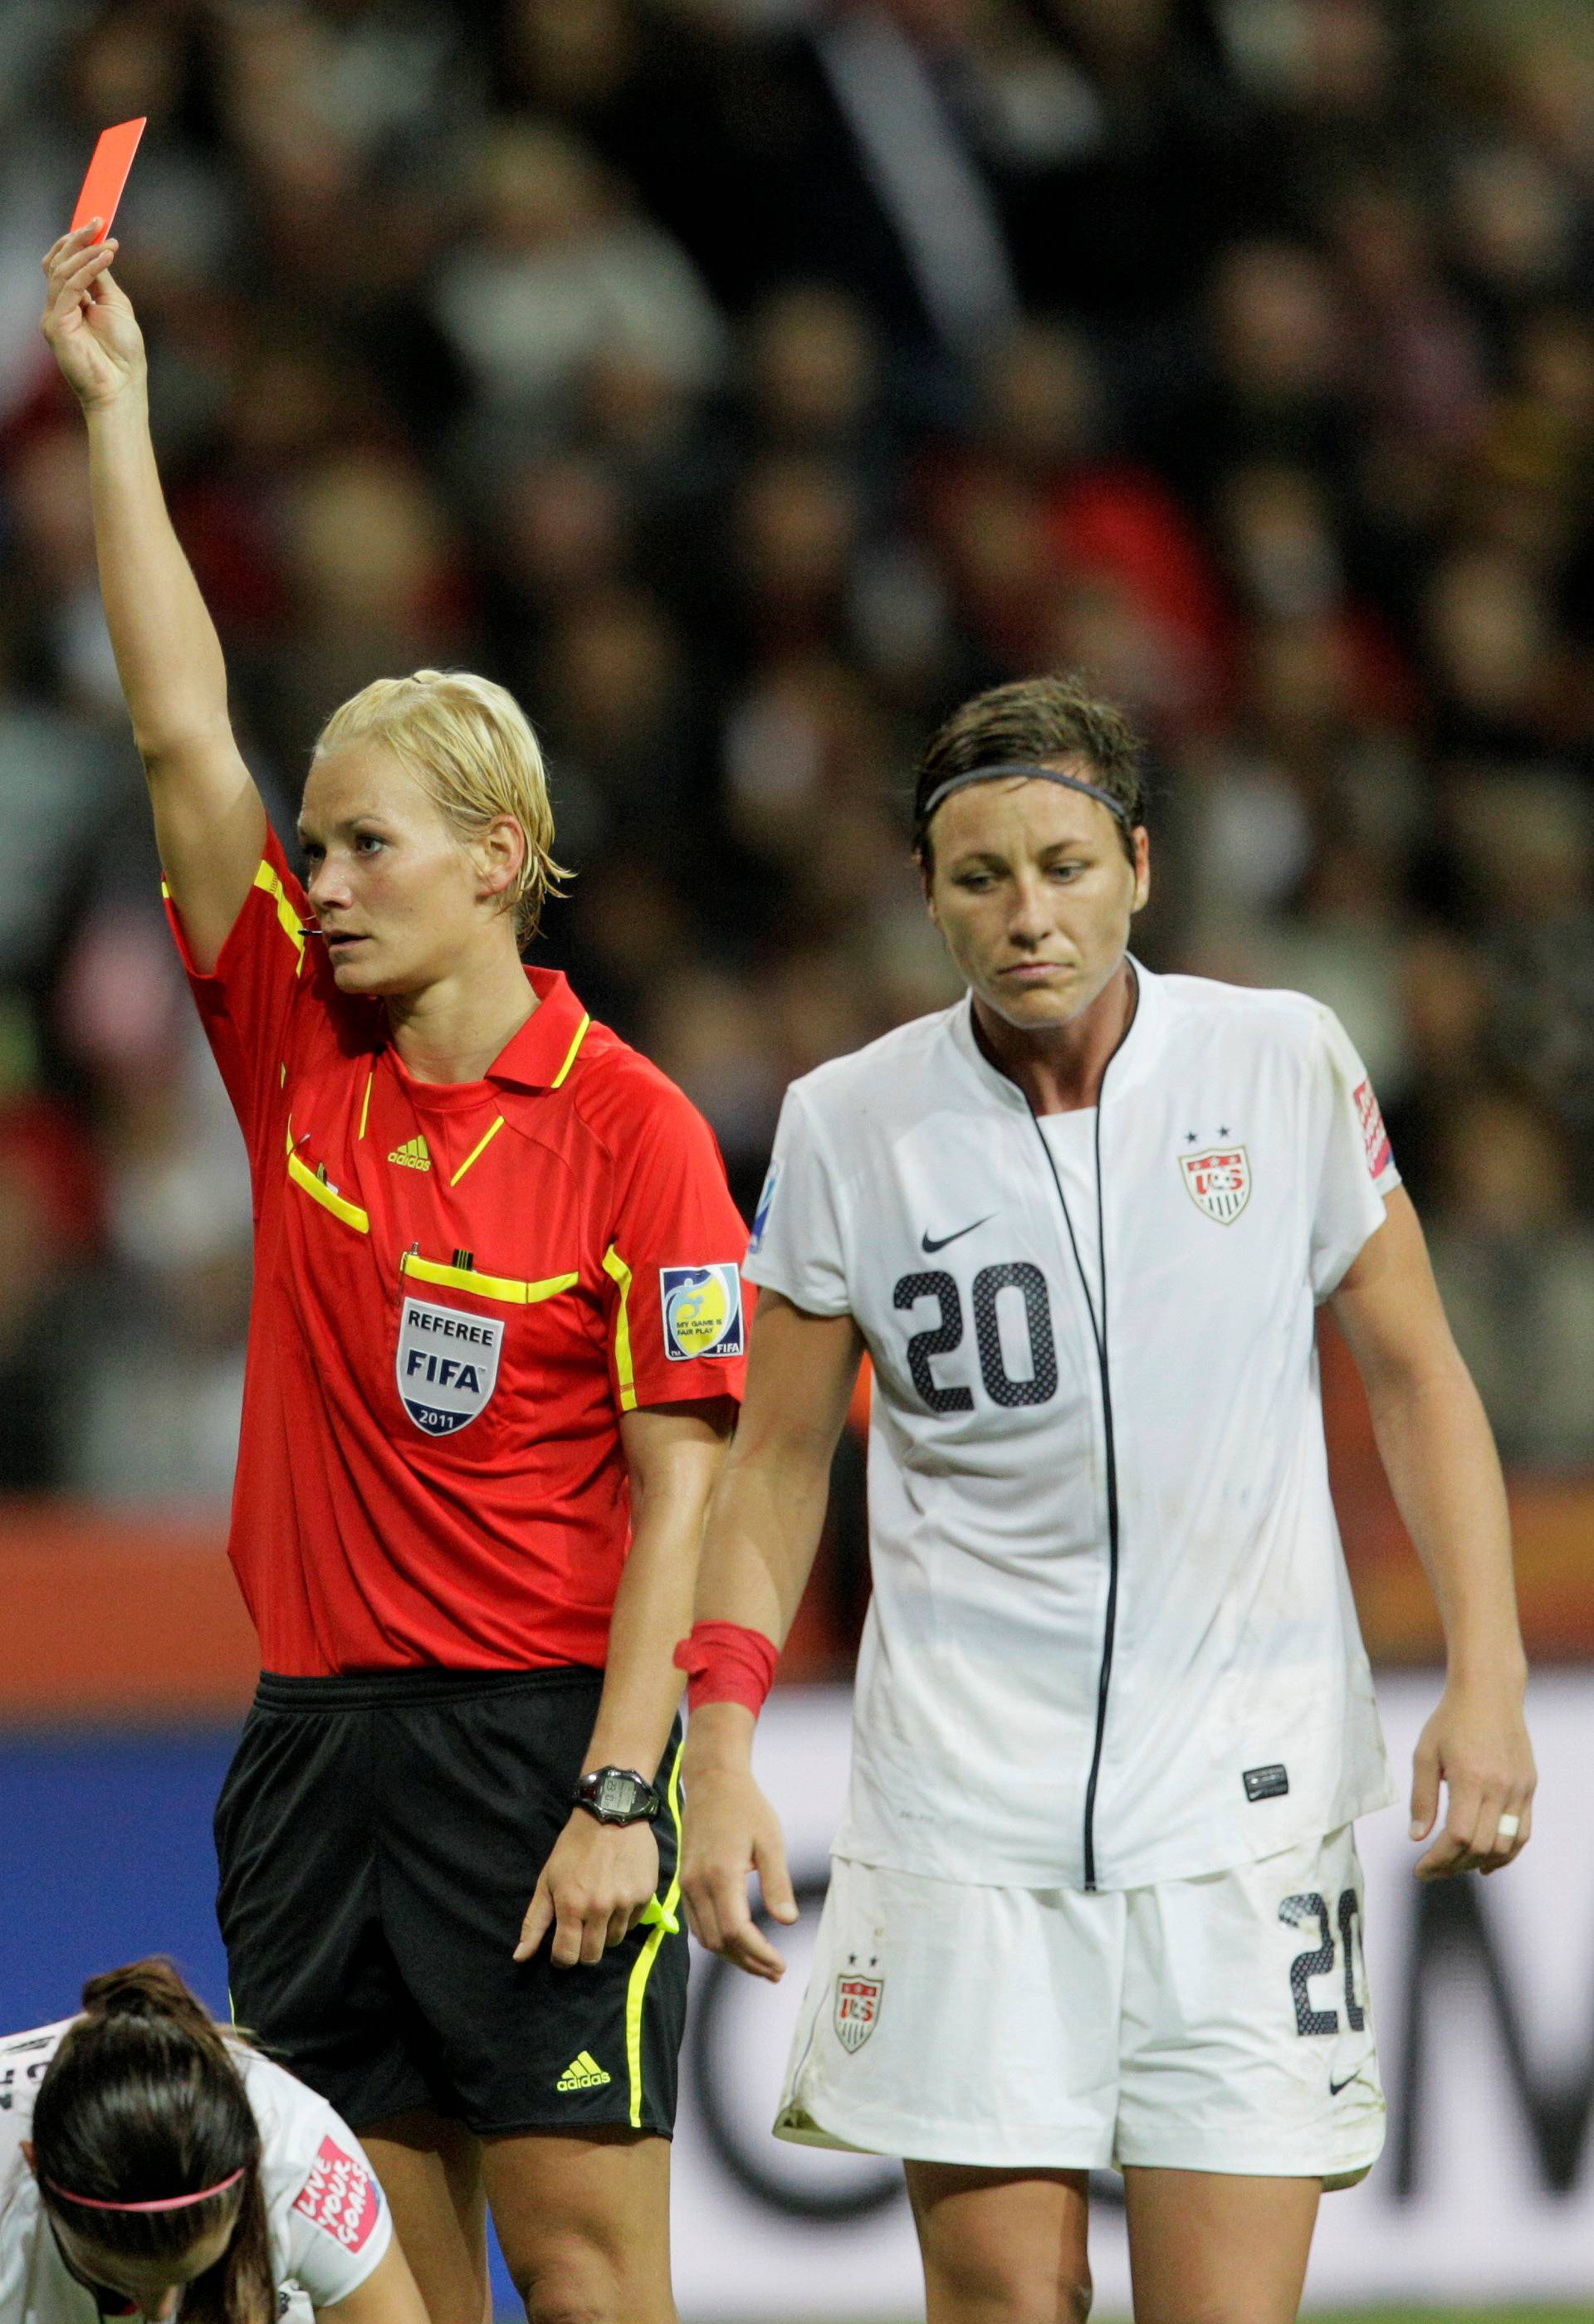 FILE PHOTO: Referee Steinhaus of Germany shows a red card to Iwashimizu of Japan during the Women's World Cup final soccer match between Japan and the U.S. in Frankfurt